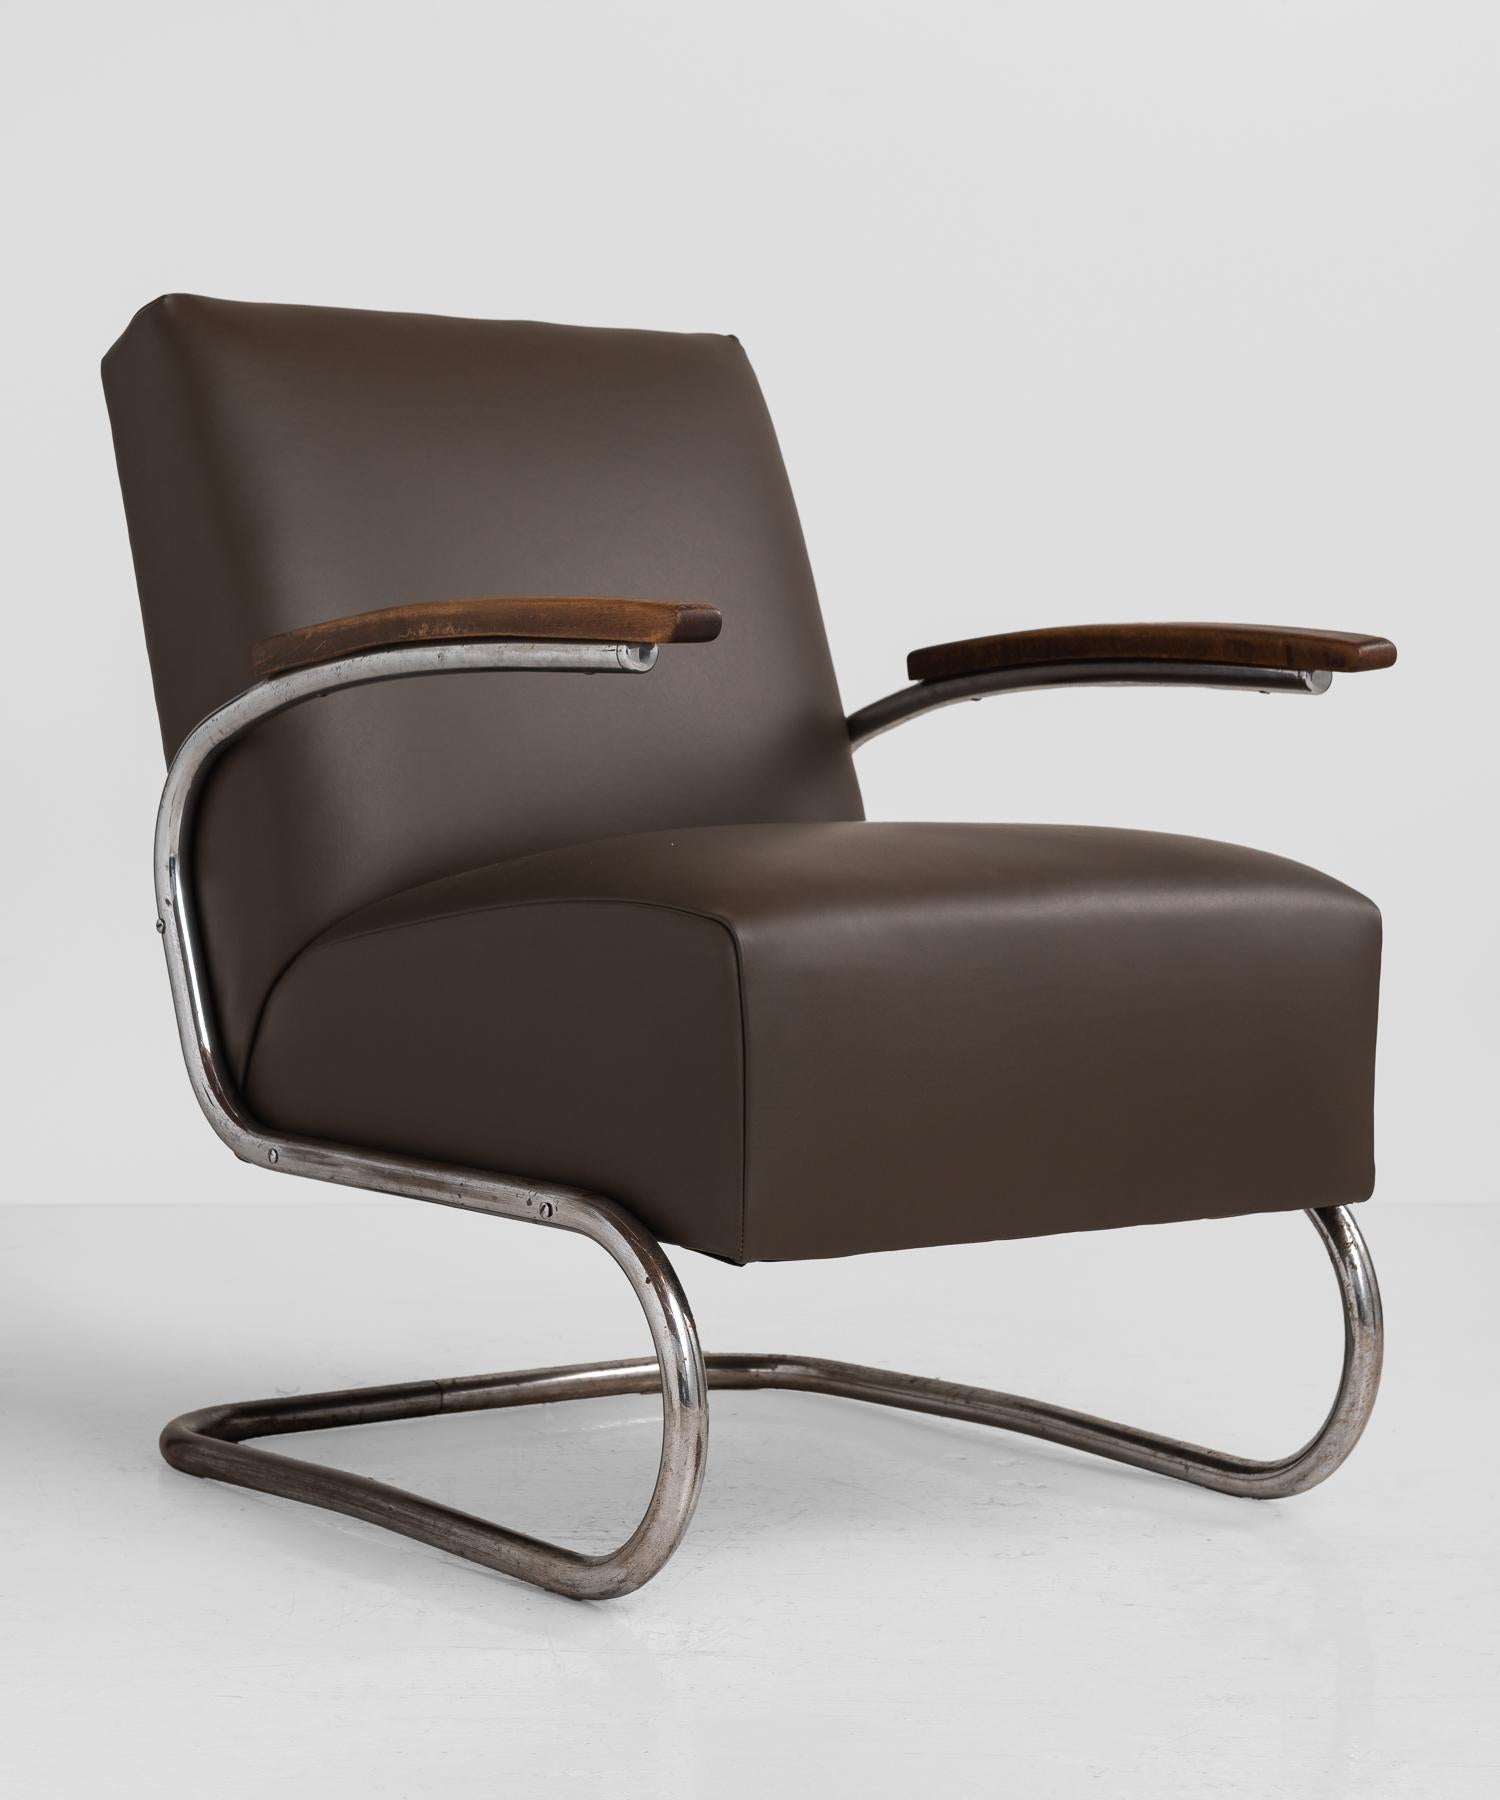 Thonet modern leather armchair, Germany, circa 1930

Model SS41 Thonet armchair, newly reupholstered in Urbane leather by Maharam. Cantilever frame in chromed steel with wooden armrests.

Measures: 27.5